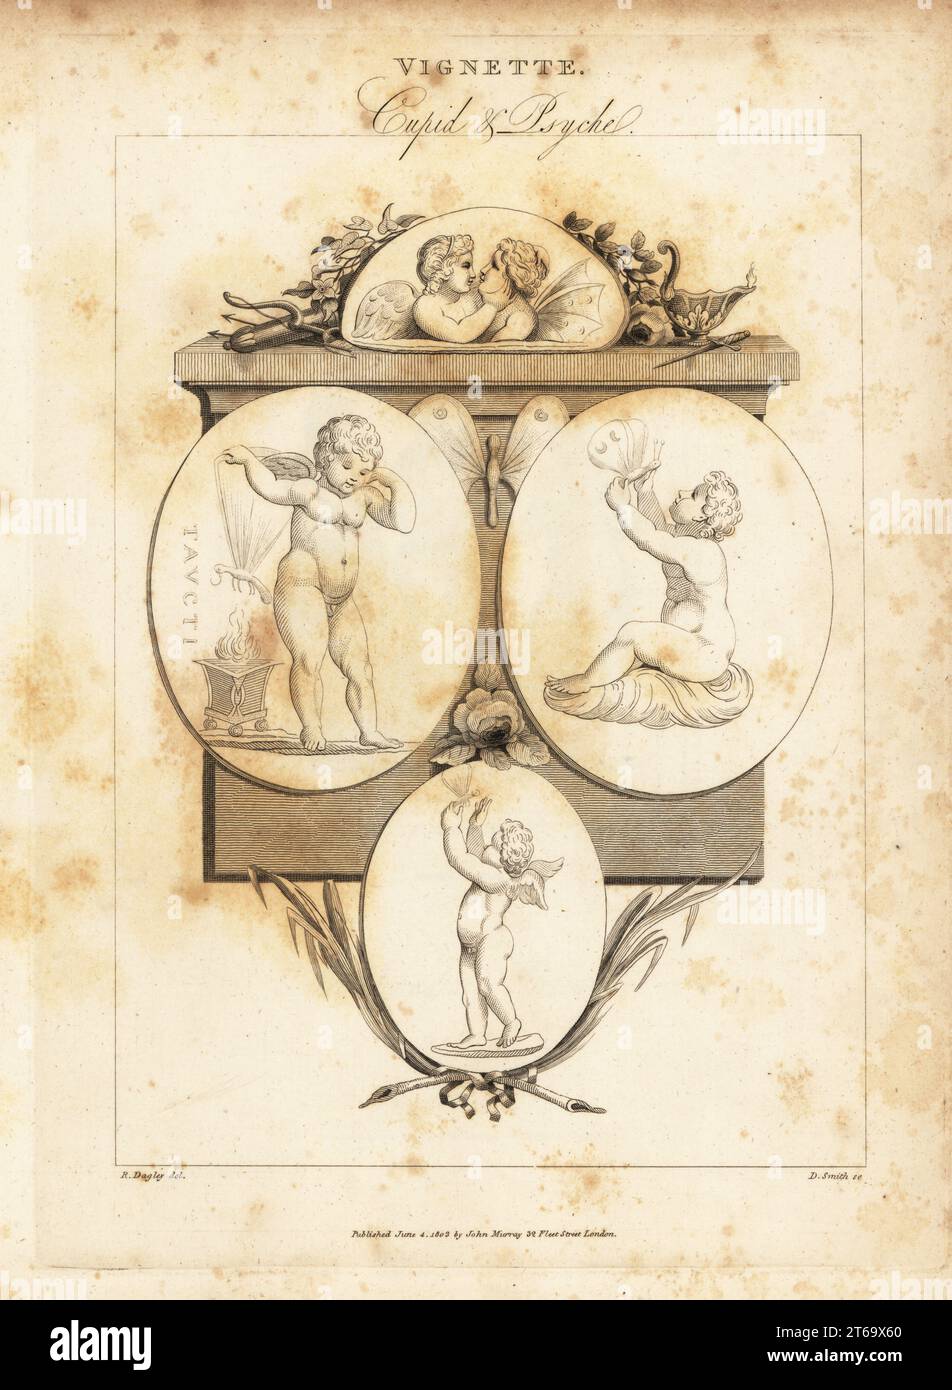 Gems illustrating Cupid and Psyche. Cameo in the Florentine Museum (top), Cupid burning a butterfly on cornelian in the possession of Mr. Crusius (left), Cupid seated on a shell with butterfly in the collection of Lord Algernon Percy (right), and Cupid with butterfly. Copperplate engraving by D. Smith after an illustration by Richard Dagley from Gems, Selected from the Antique, with Illustrations, John Murray, London, 1804. Stock Photo